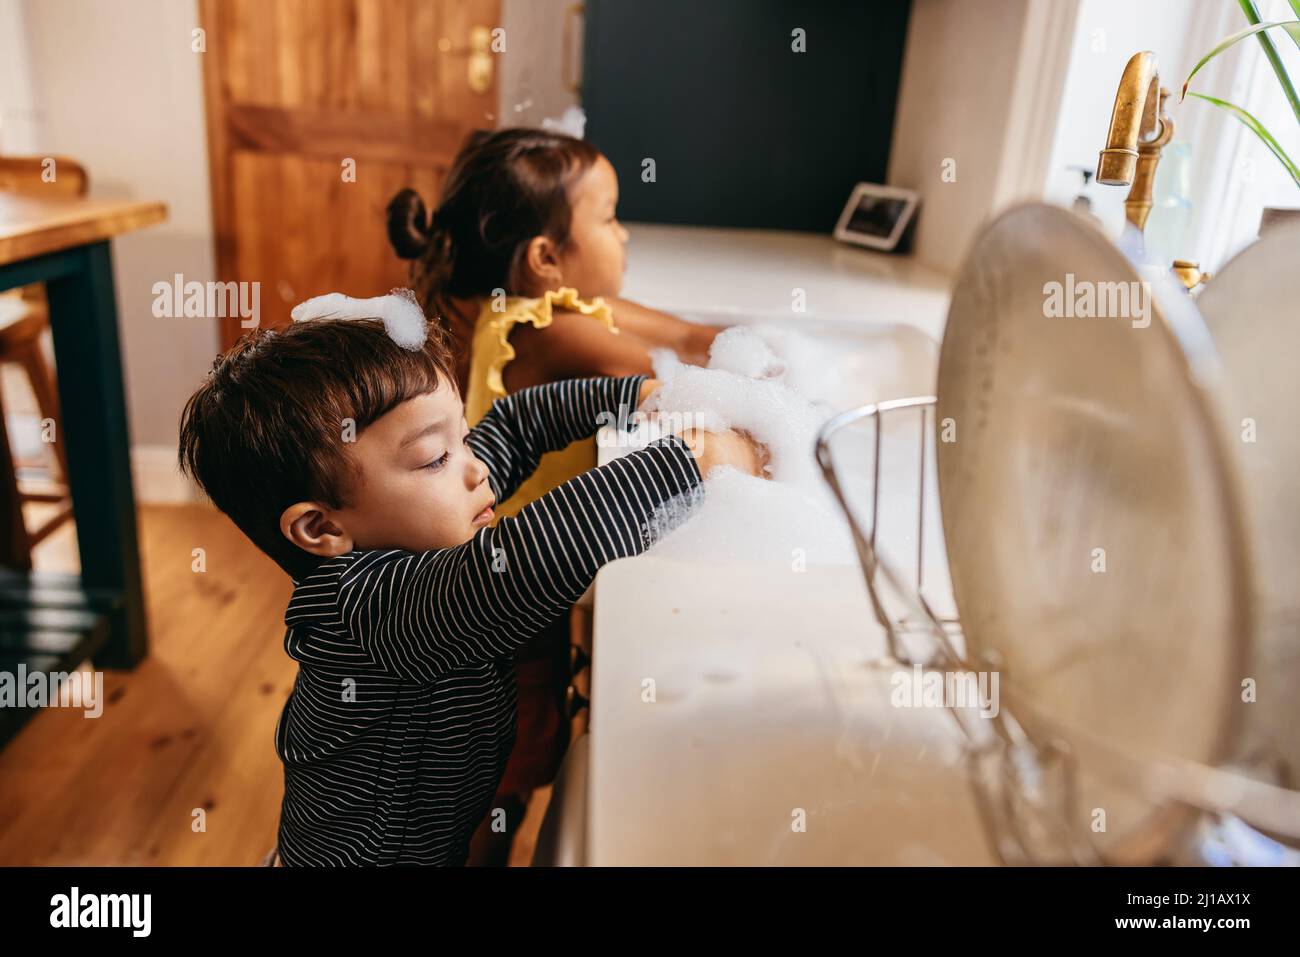 Two little toddlers playing with white foam at home. Two adorable young siblings sticking their hands into a sink full of bubbles at home. Stock Photo